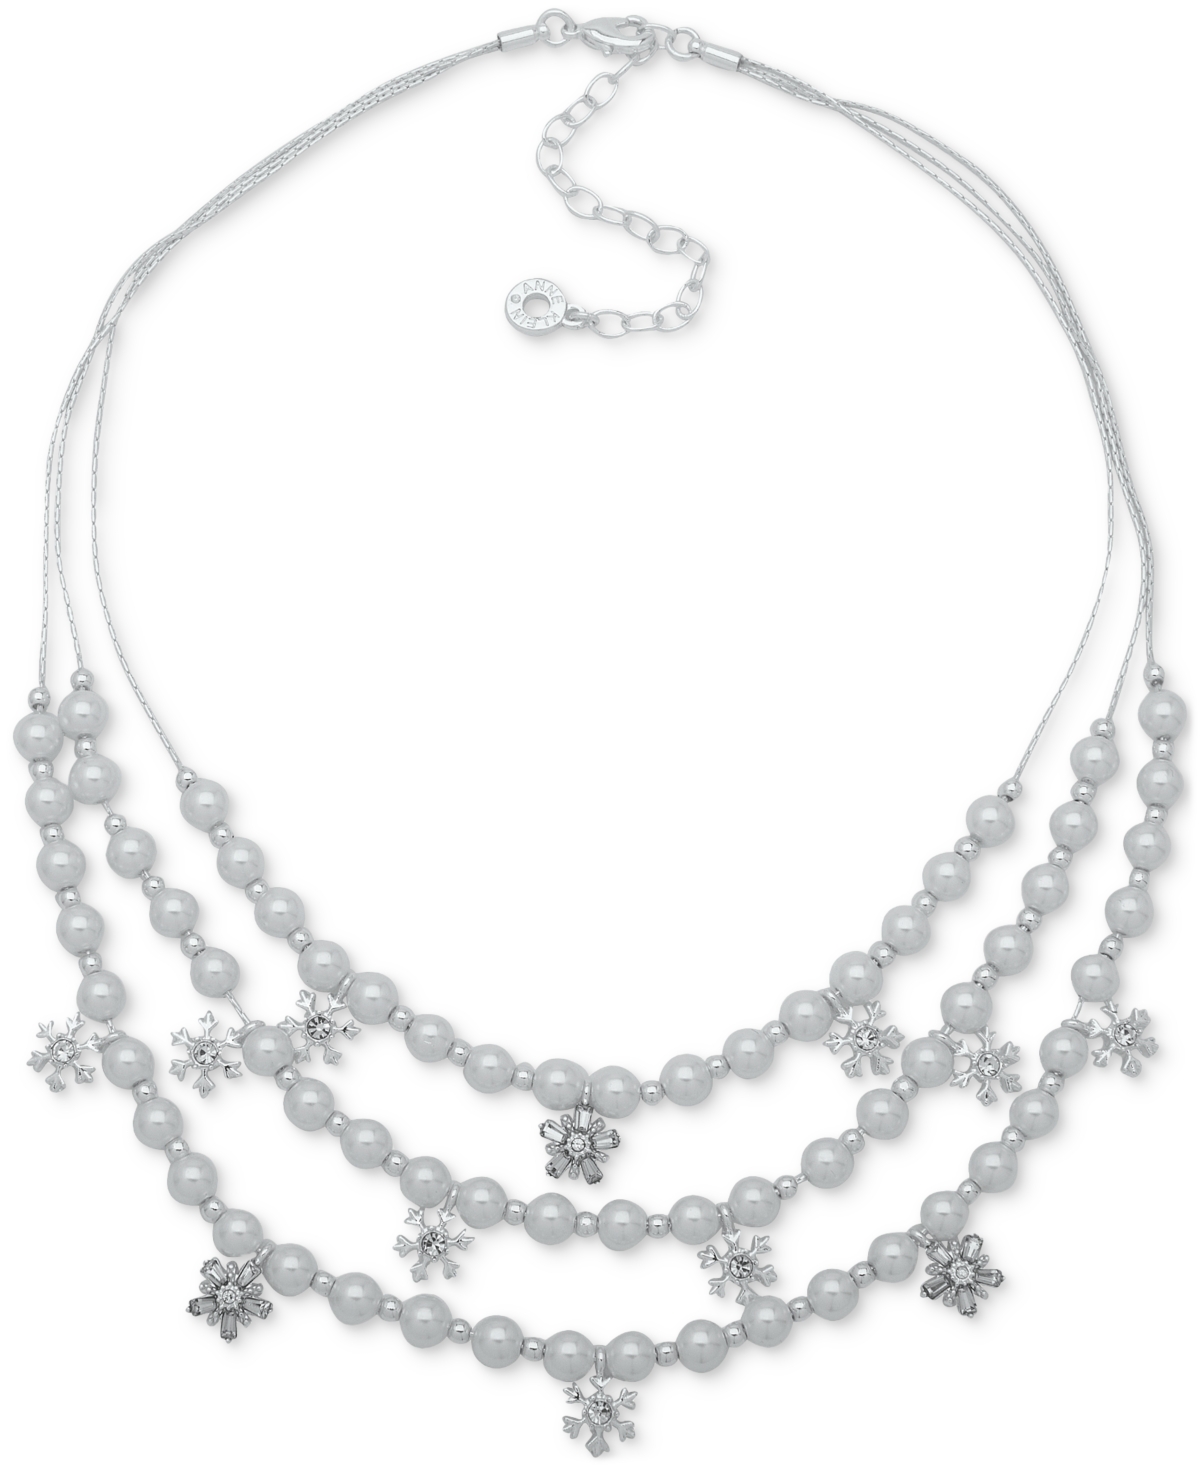 Silver-Tone Crystal Snowflake & Imitation Pearl Layered Collar Necklace, 16" + 3" extender - Crystal